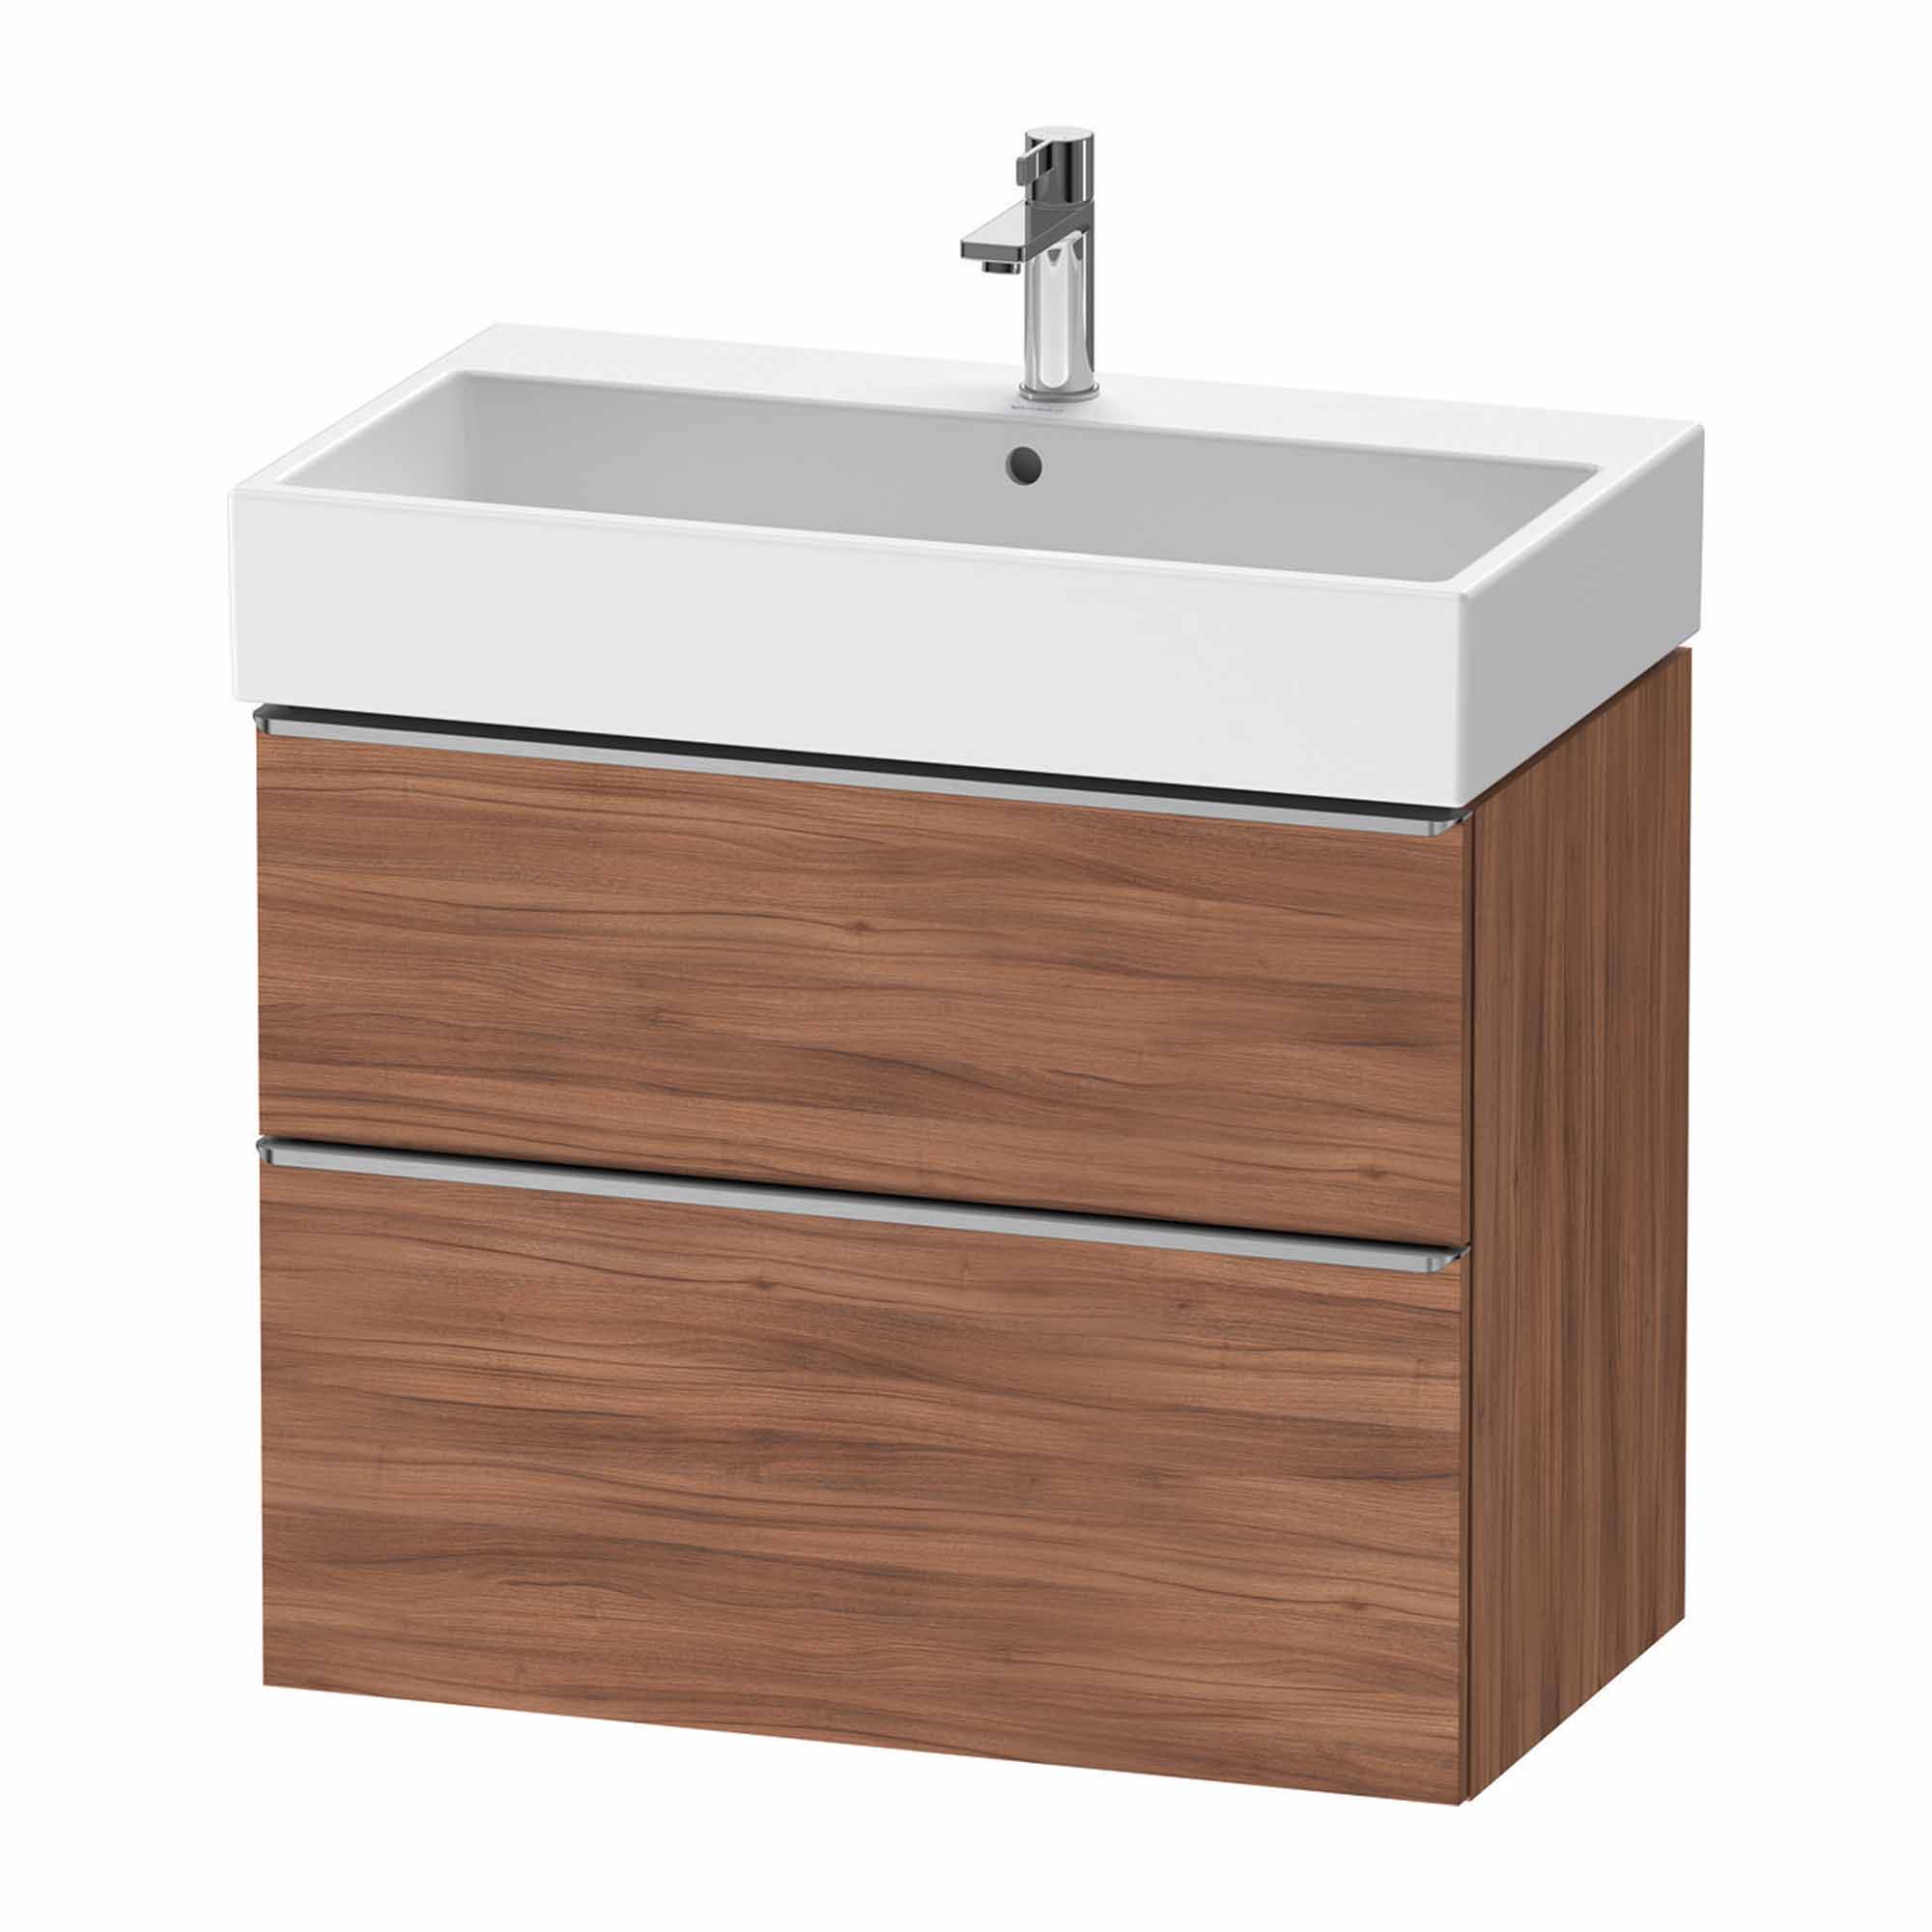 duravit d-neo 800 wall mounted vanity unit with vero basin walnut stainless steel handles